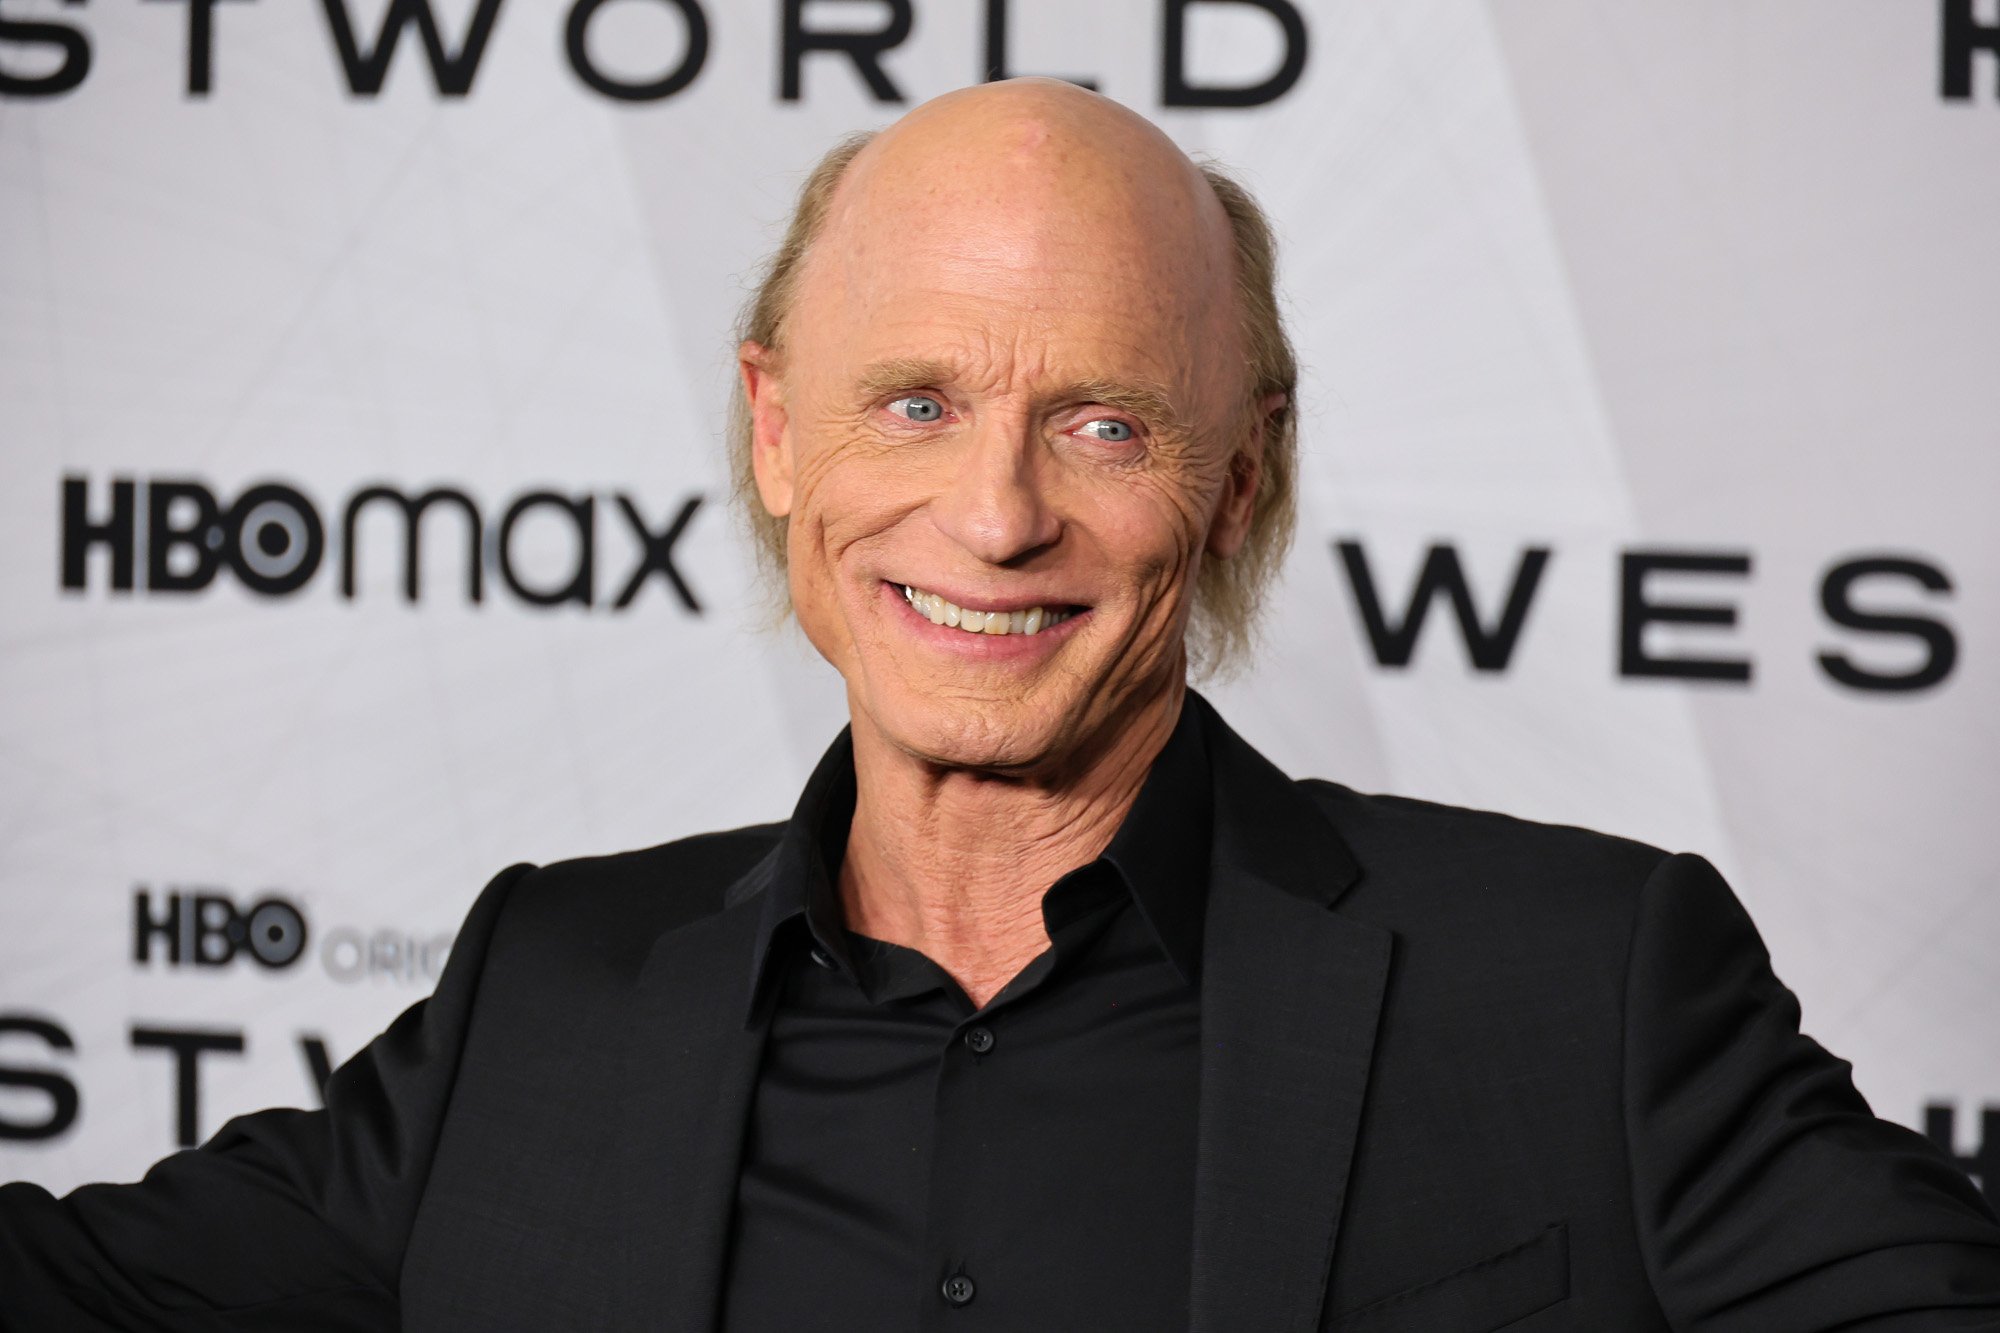 'Westworld' Season 4 star Ed Harris. He's wearing a black suit, holding his arms out, and smiling.